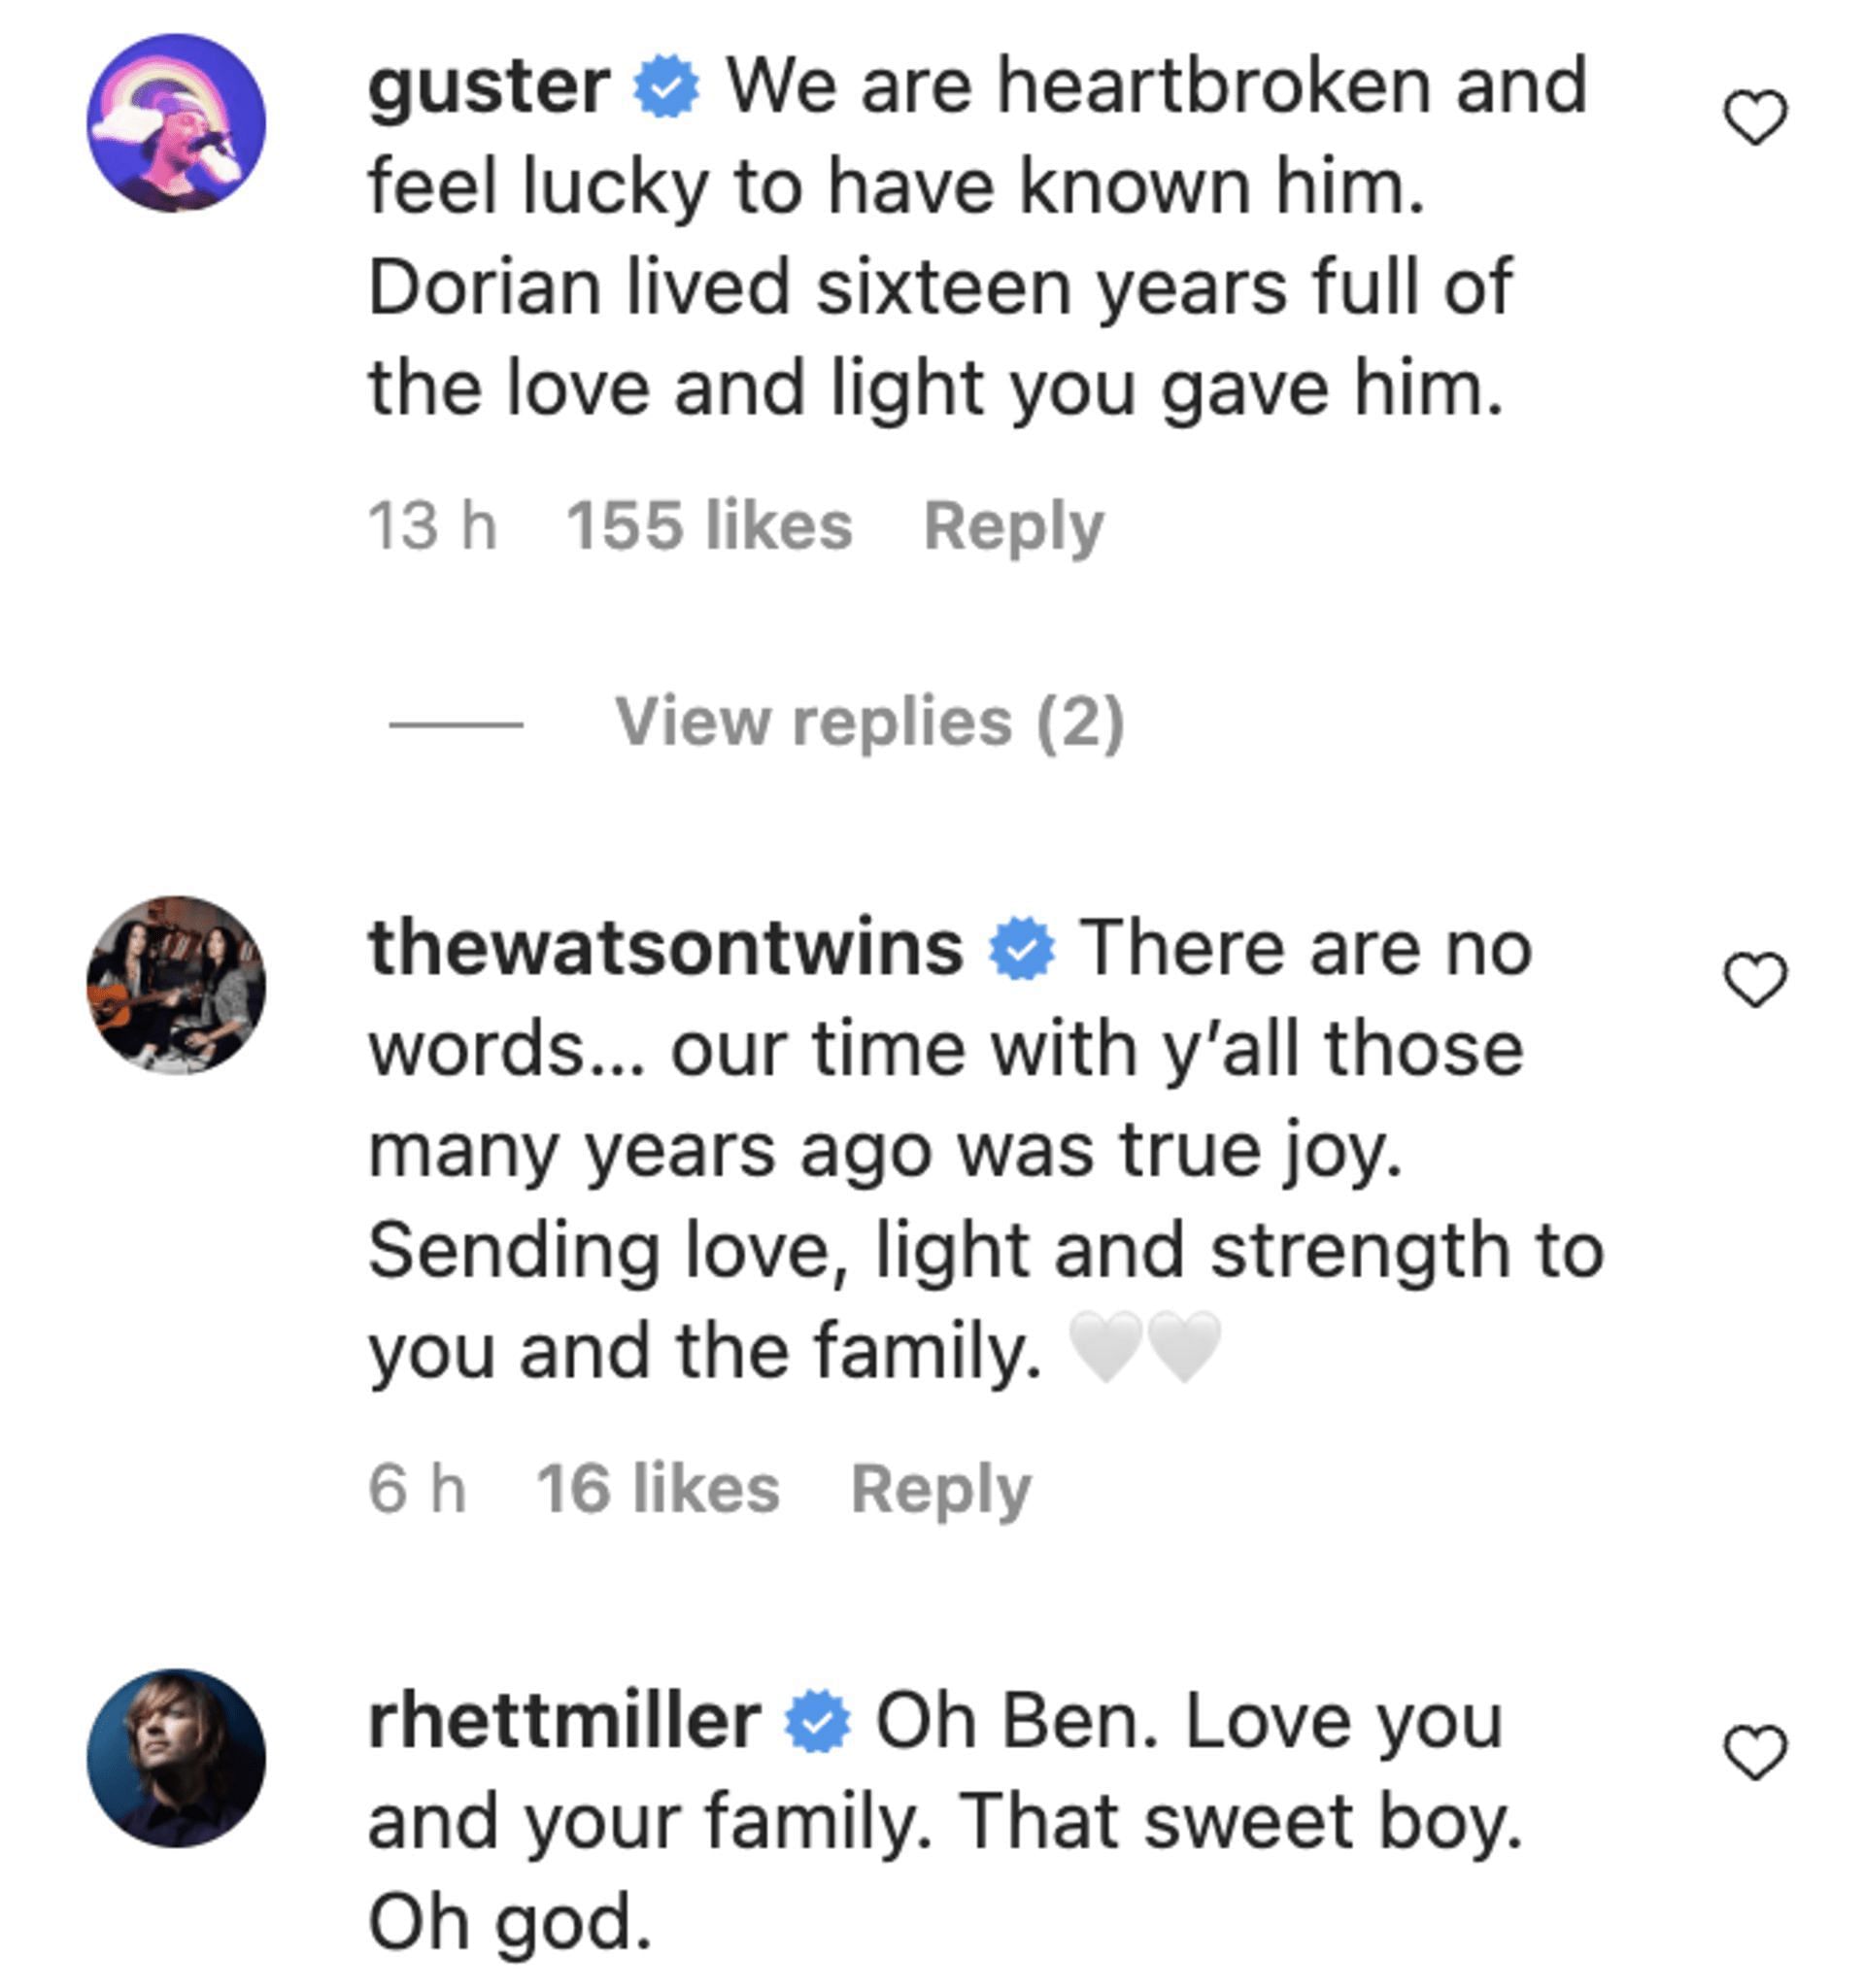 After Ben announced the passing away of his 16-year-old child, many social media users and celebrities commented on the post to share their condolences. (Image via Instagram)